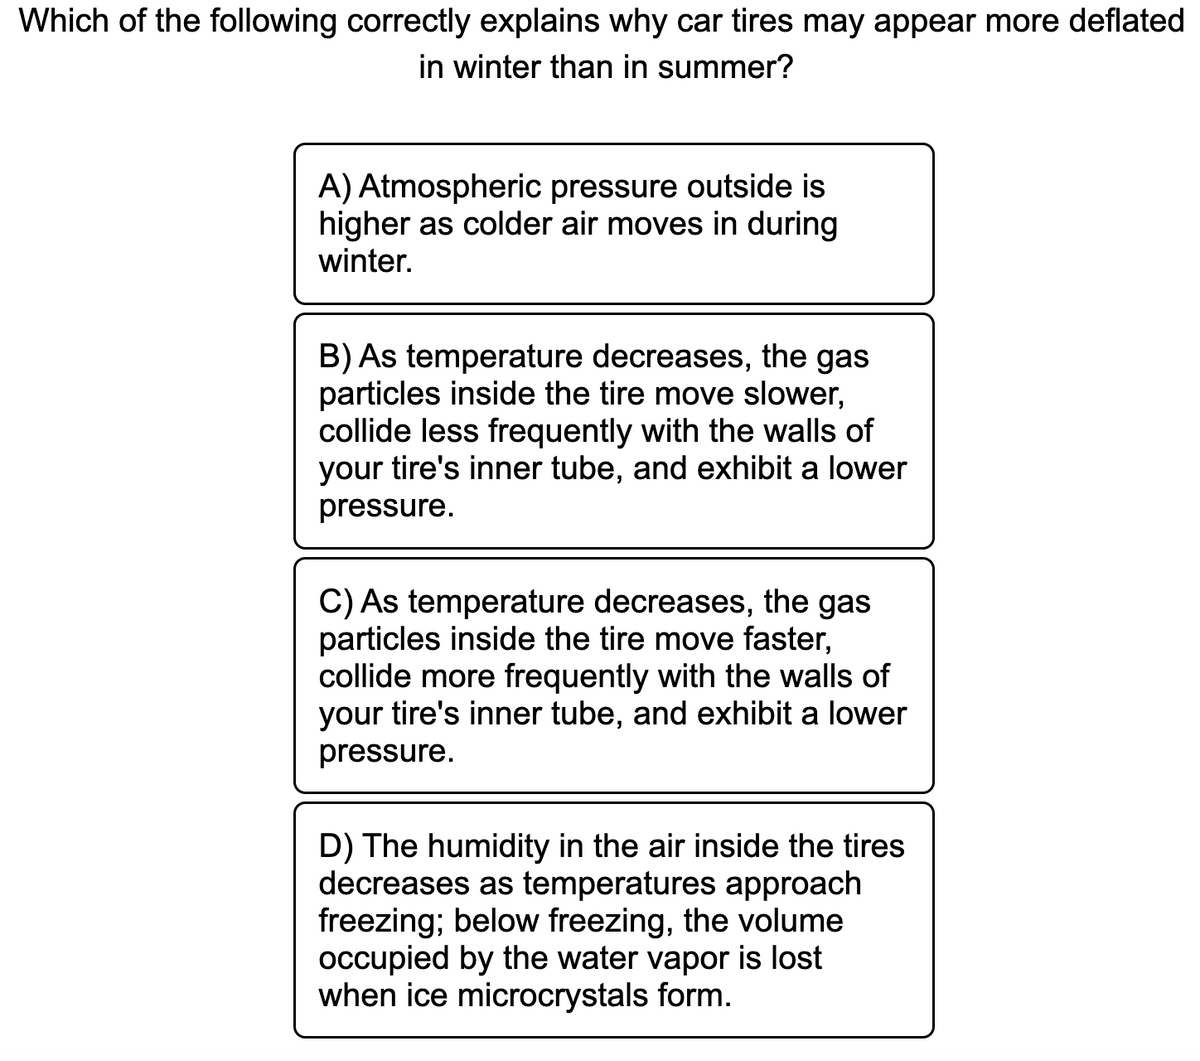 Which of the following correctly explains why car tires may appear more deflated
in winter than in summer?
A) Atmospheric pressure outside is
higher as colder air moves in during
winter.
B) As temperature decreases, the gas
particles inside the tire move slower,
collide less frequently with the walls of
your tire's inner tube, and exhibit a lower
pressure.
C) As temperature decreases, the gas
particles inside the tire move faster,
collide more frequently with the walls of
your tire's inner tube, and exhibit a lower
pressure.
D) The humidity in the air inside the tires
decreases as temperatures approach
freezing; below freezing, the volume
occupied by the water vapor is lost
when ice microcrystals form.